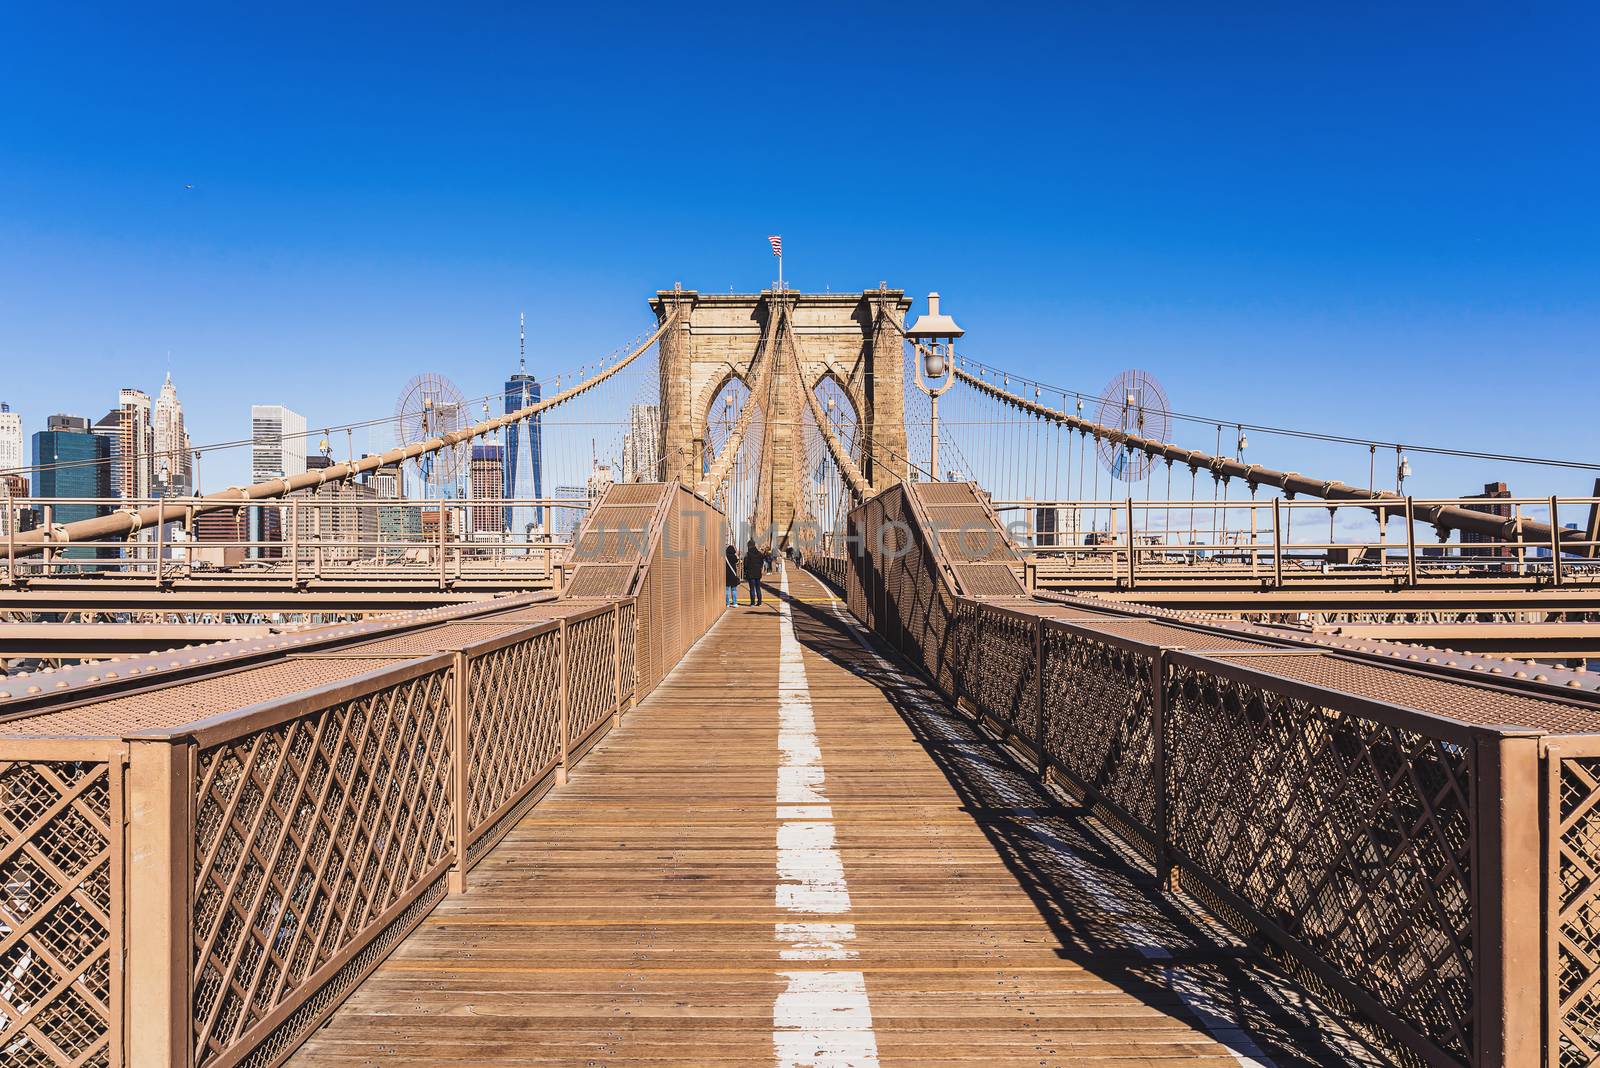 Brooklyn bridge at day time when Sparse tourists in coronavirus by Tzido